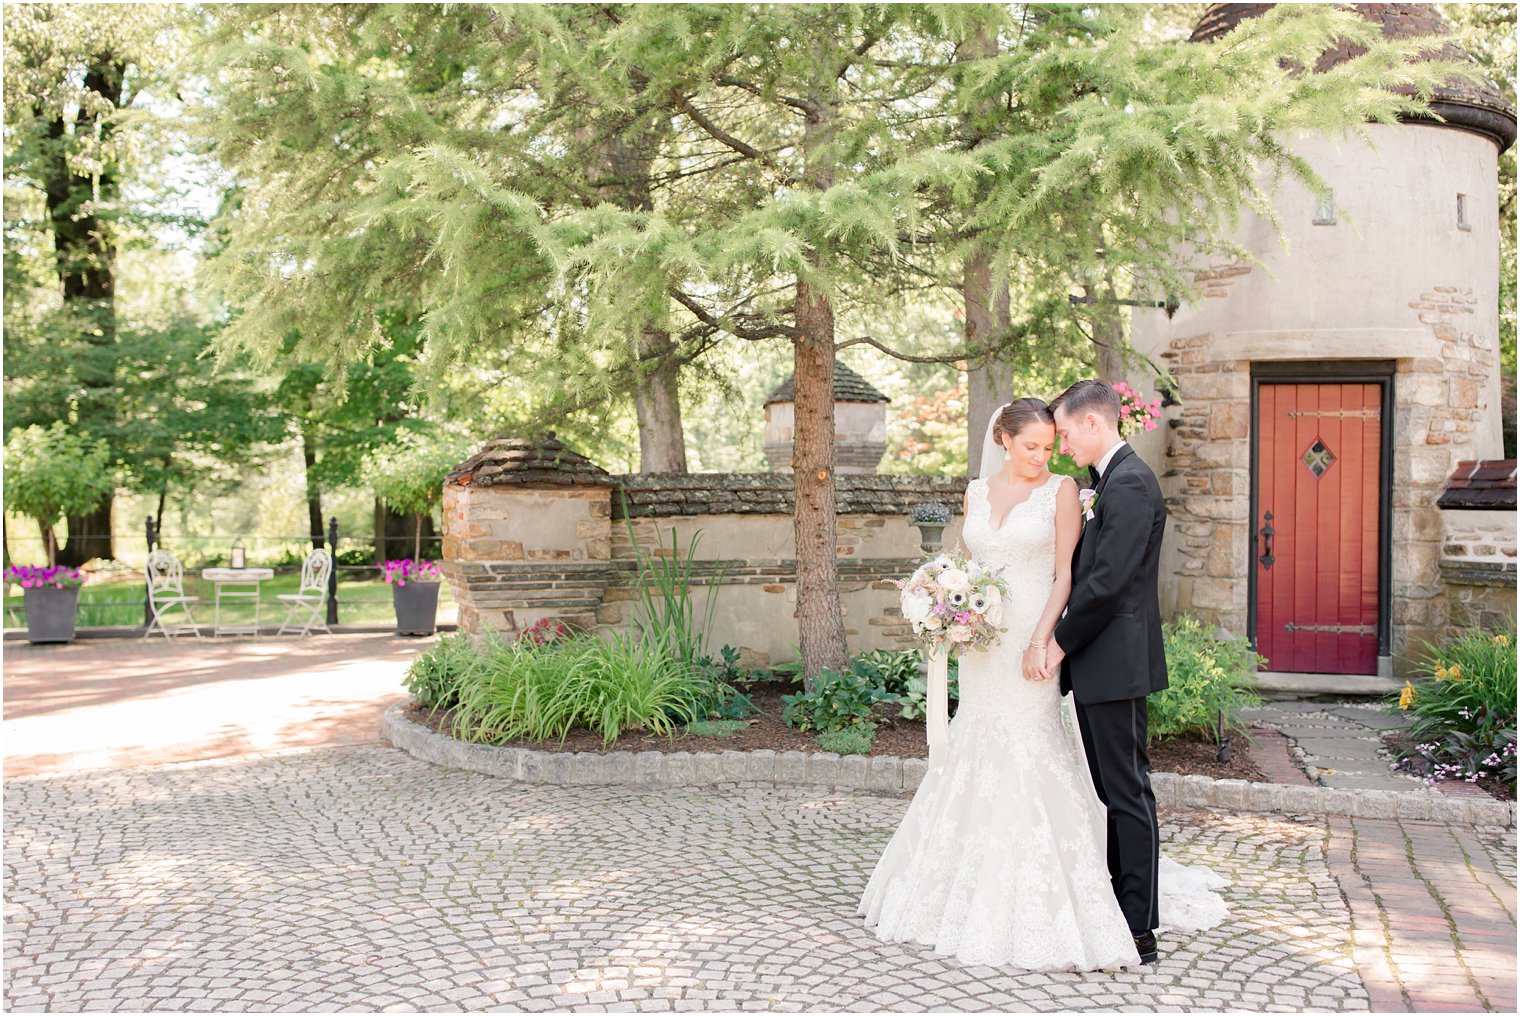 classic and timeless wedding photos at Pleasantdale Chateau